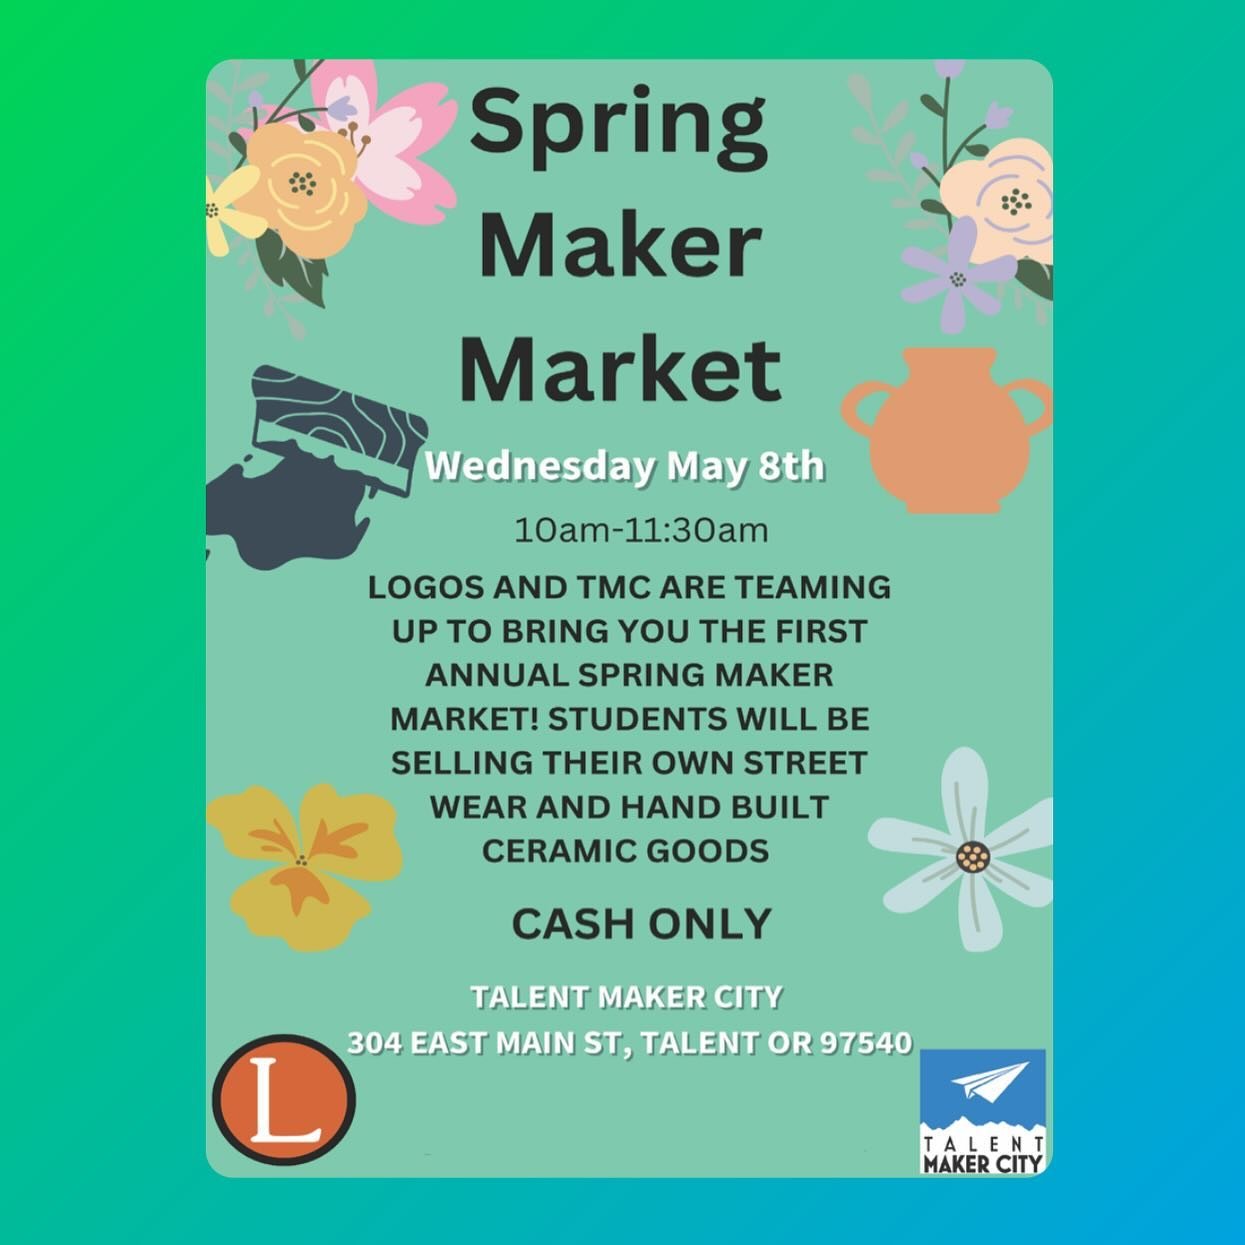 [Spanish Below]
@logospubliccharter and TMC are teaming up to bring you to our annual Maker Market! Students will be selling their own street ware, hand made wooden projects, and hand built ceramic goods. Please join us on May 8th at TMC from 10am-11